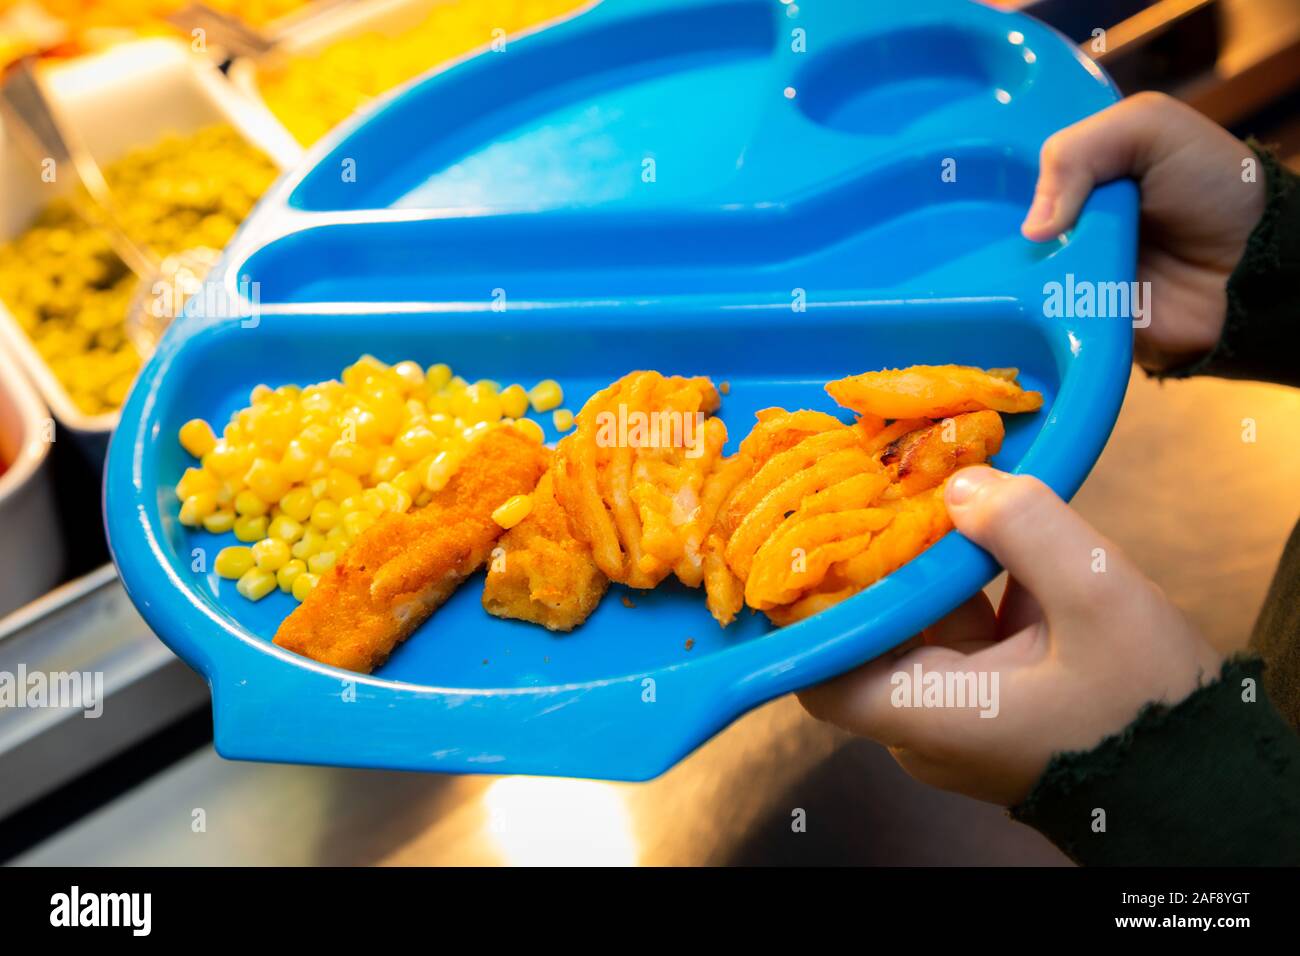 Tray of school lunch or dinner in a UK primary school Stock Photo